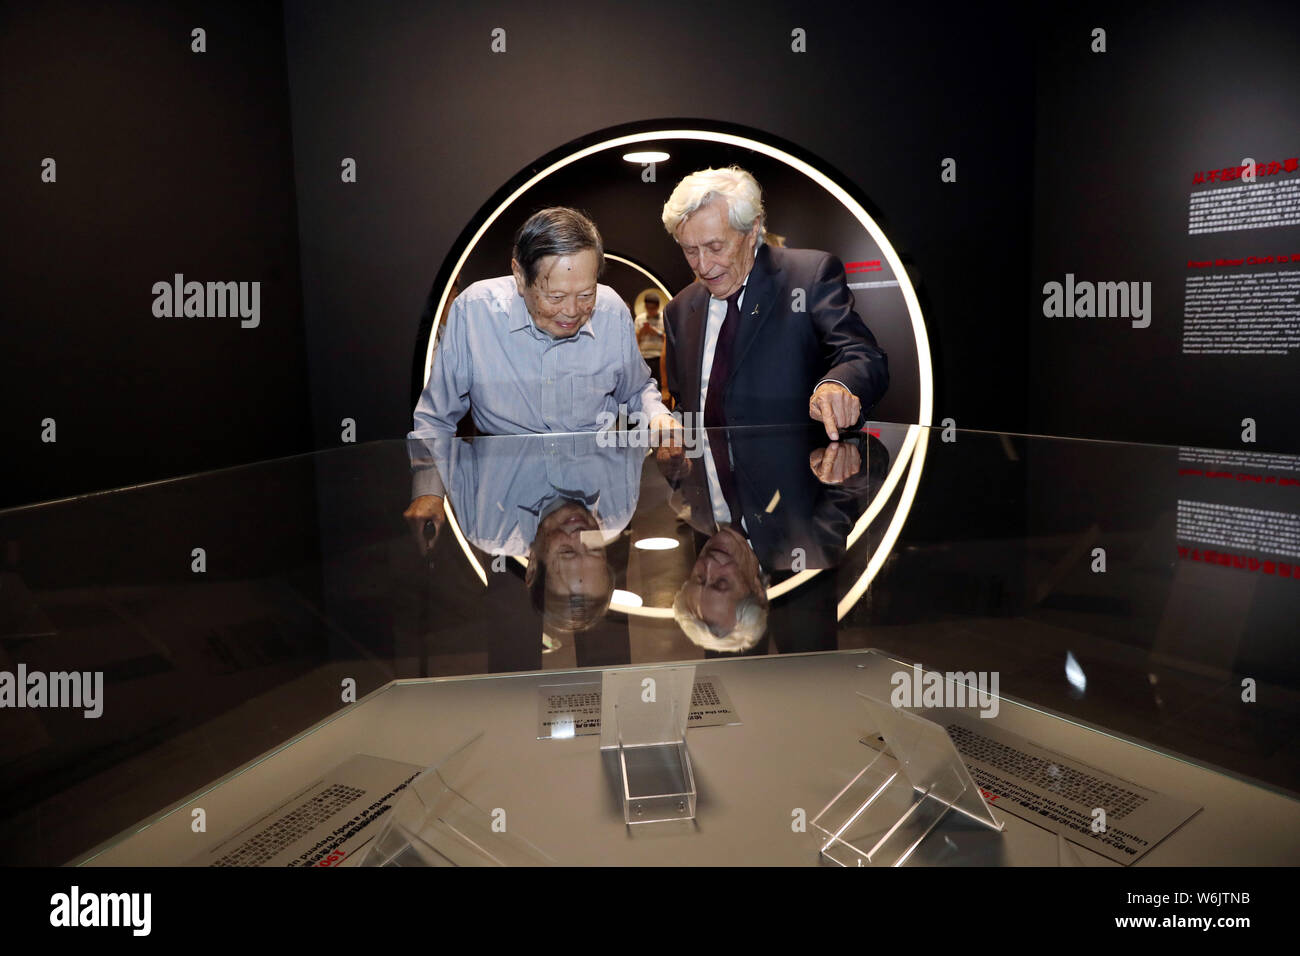 Shanghai. 1st Aug, 2019. Nobel Laureate in Physics Yang Chen-ning (L) and former president of the Hebrew University of Jerusalem Hanoch Gutfreund view exhibits at the World Expo Museum in east China's Shanghai, Aug. 1, 2019. An exhibition of Albert Einstein opens to public here on Aug. 2, showcasing over 100 exhibits related to the brilliant scientist. This year marks the 140 anniversary of the scientist's birth. Credit: Liu Ying/Xinhua/Alamy Live News Stock Photo